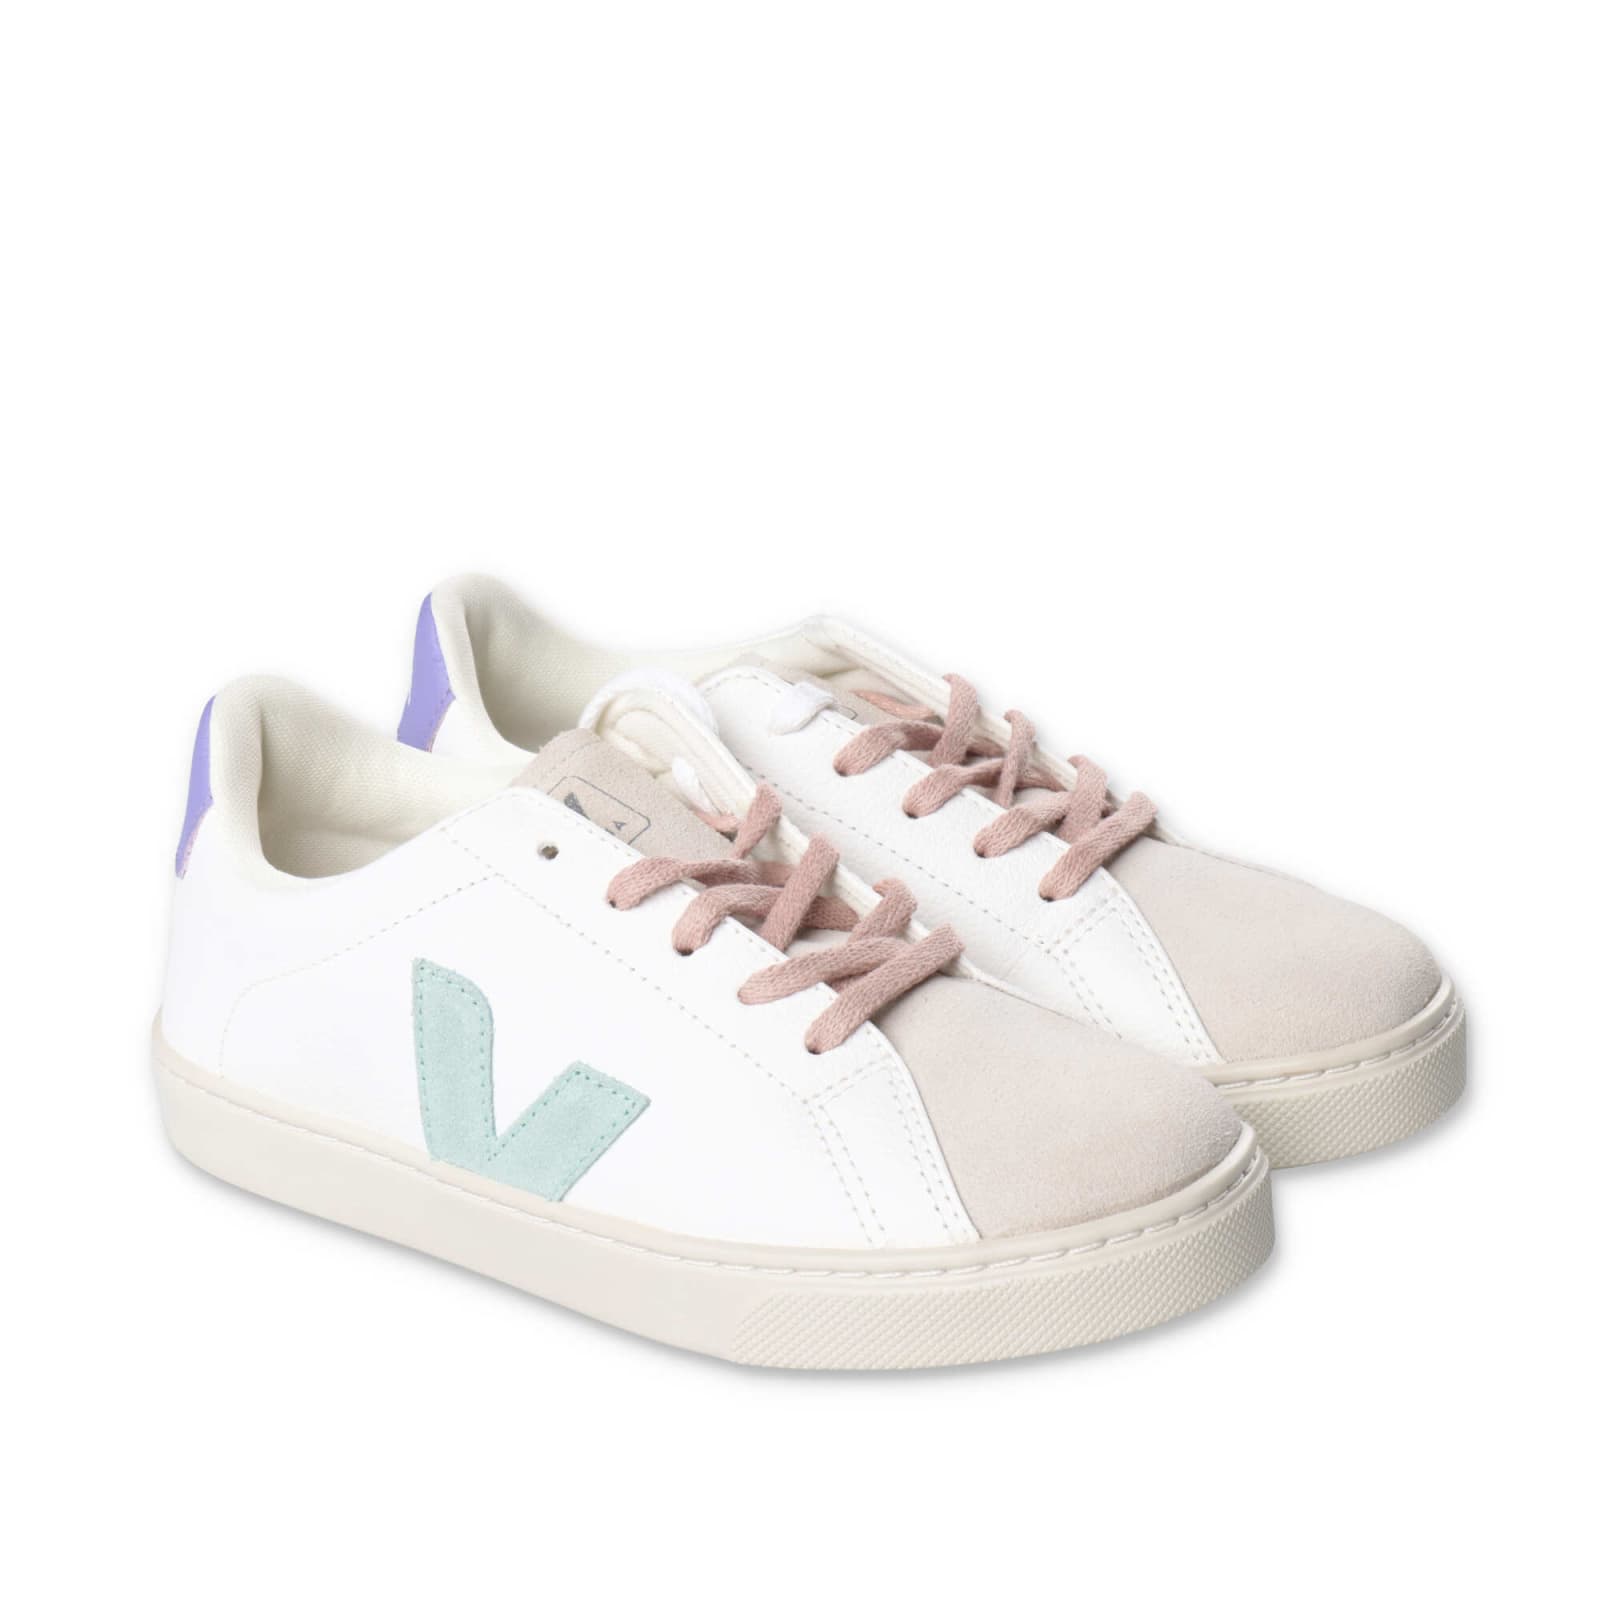 Veja Sneakers Bianche In Similpelle Con Lacci